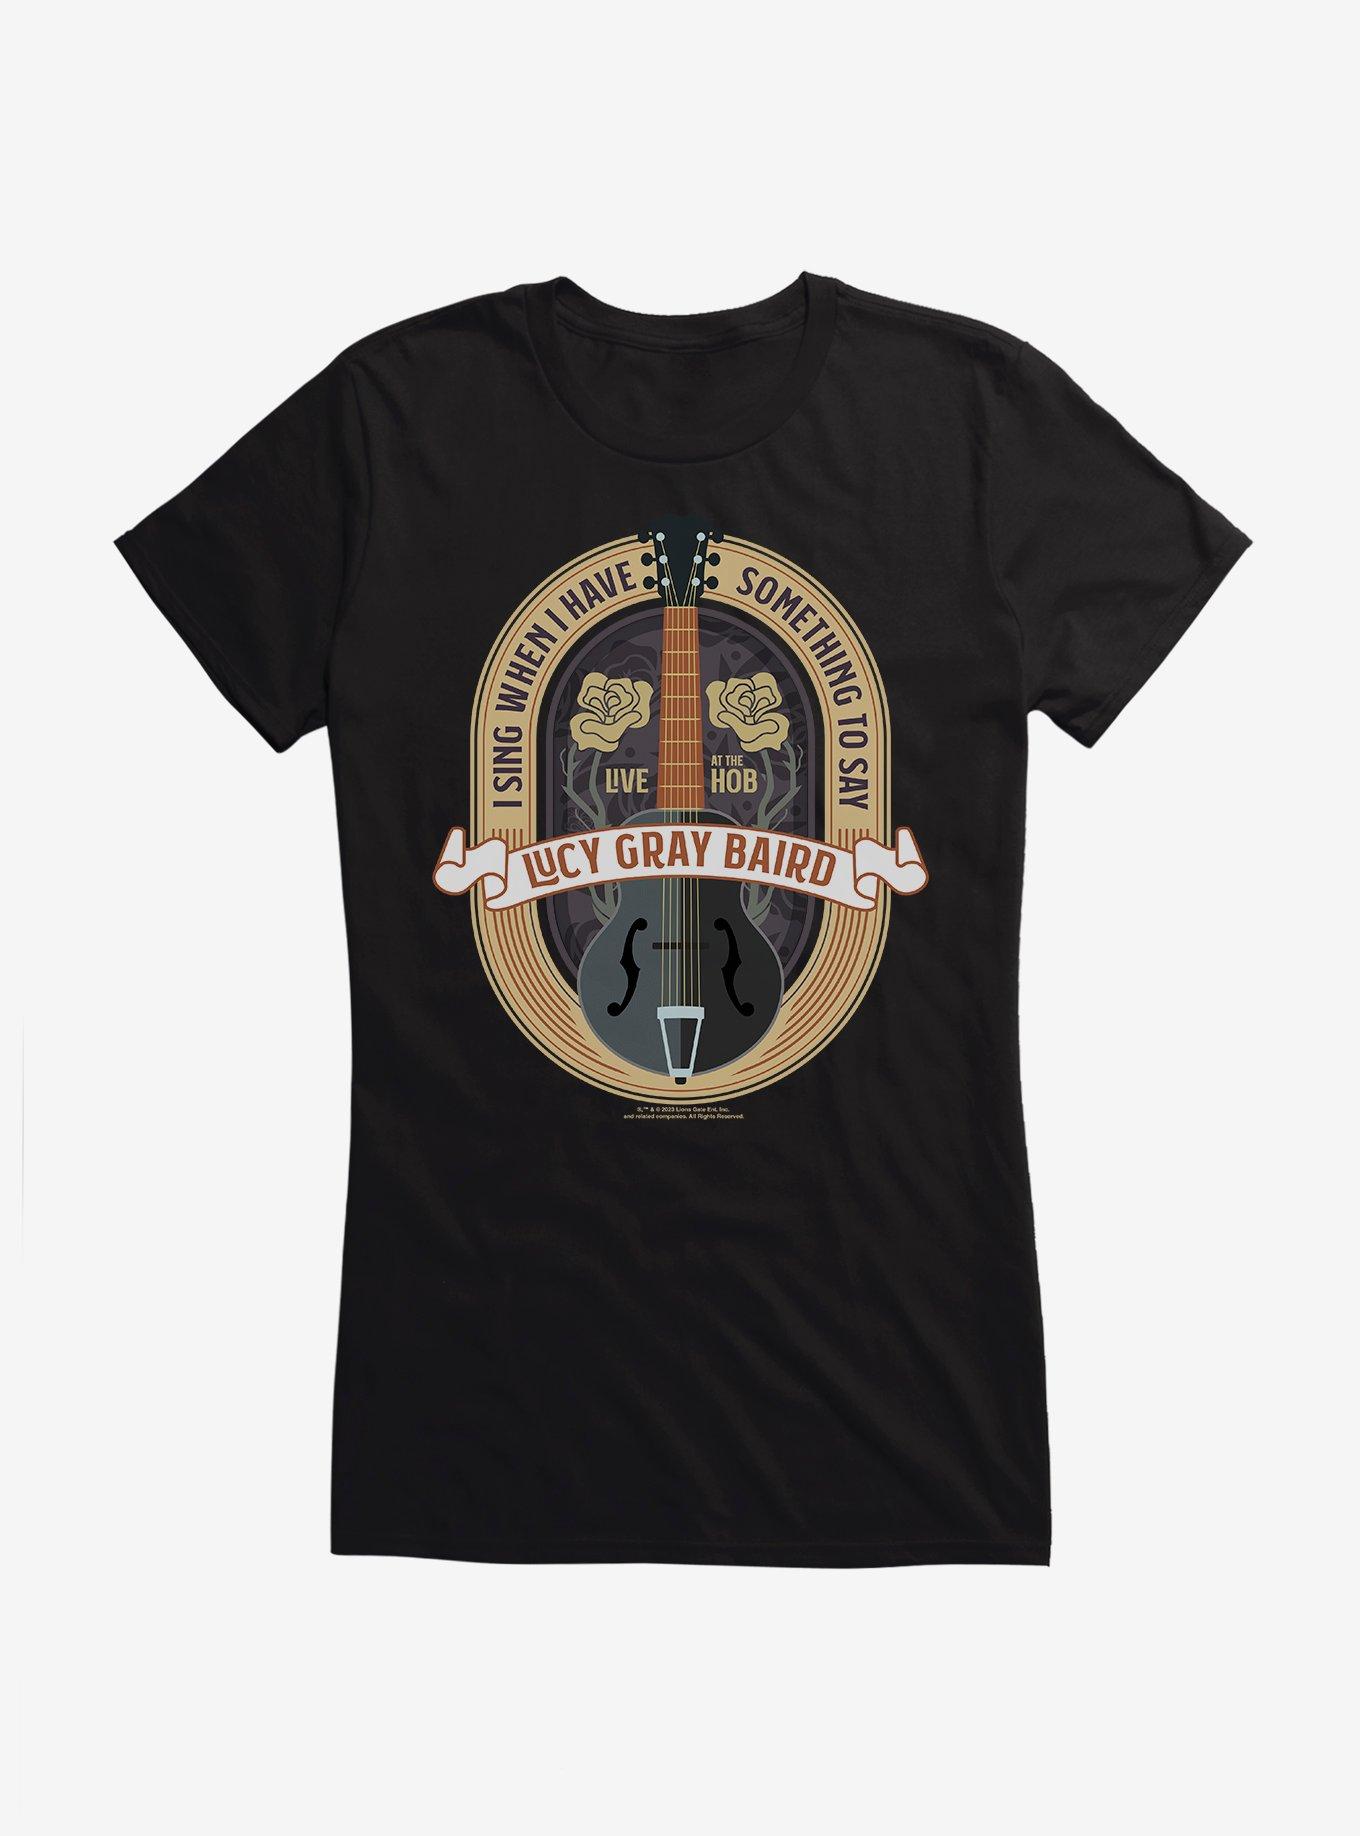 Hunger Games: The Ballad Of Songbirds And Snakes Lucy Gray Baird I Sing Girls T-Shirt